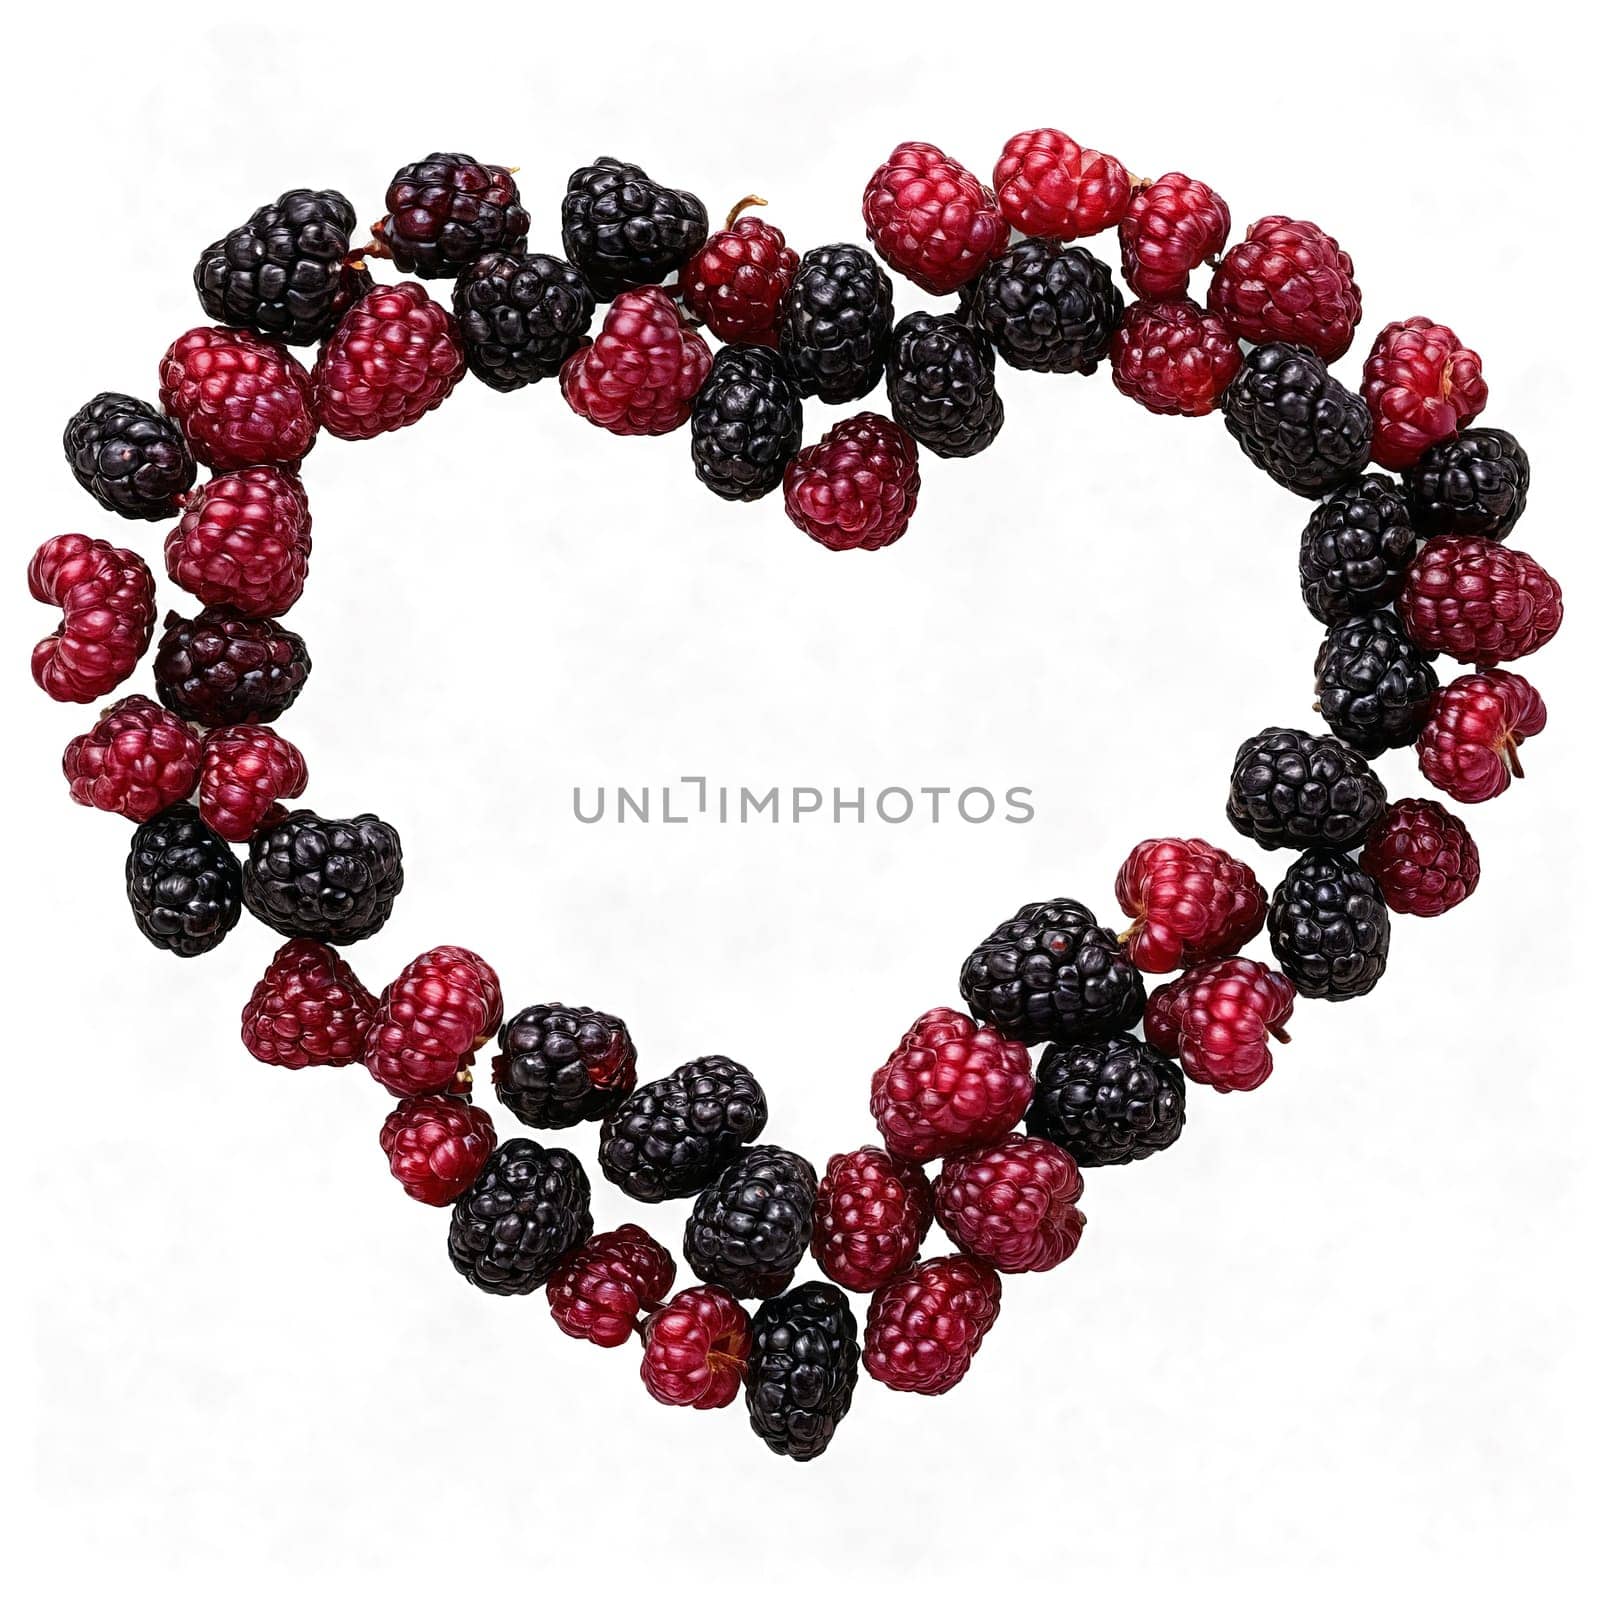 Mulberries ripe mulberries arranged in a heart shape with some berries falling and leaving by panophotograph